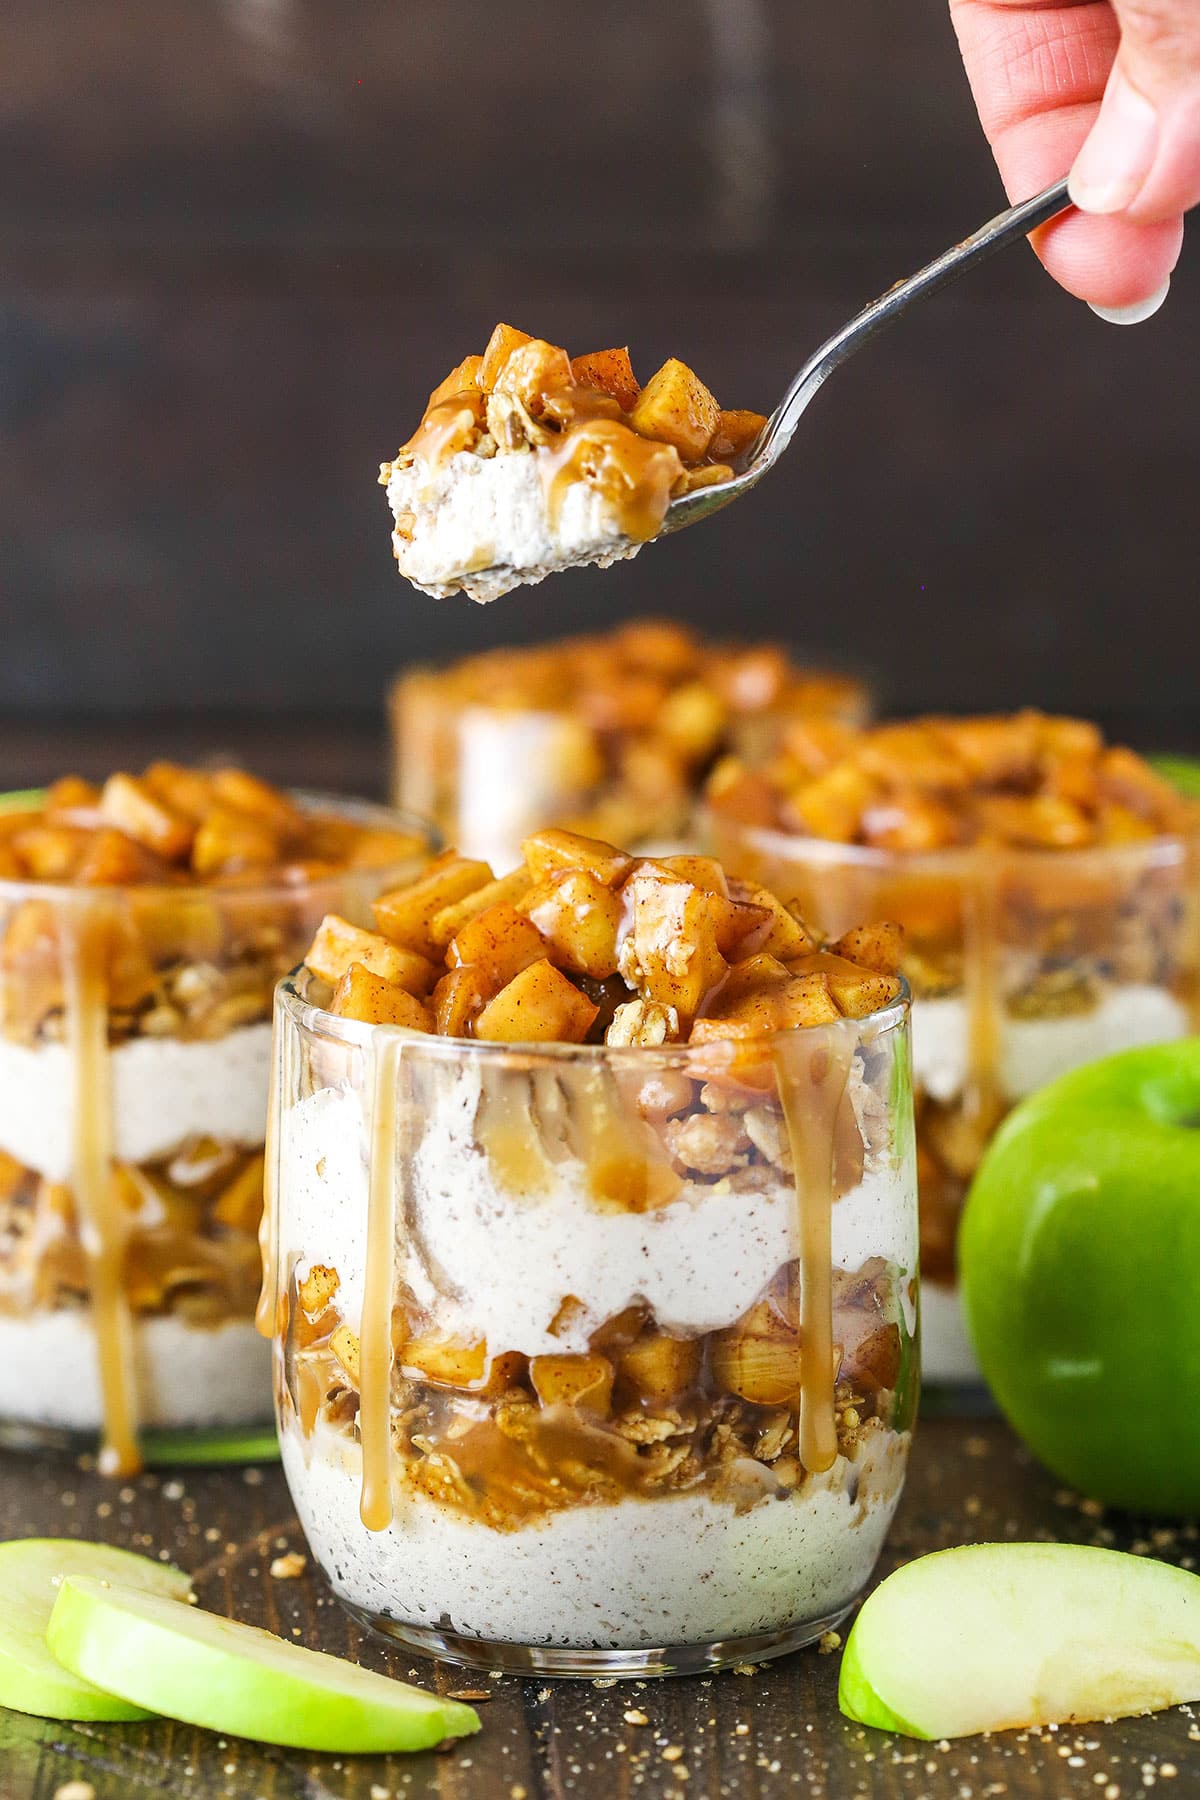 Side image of a Caramel Apple Trifle with a spoon lifting a spoonful out